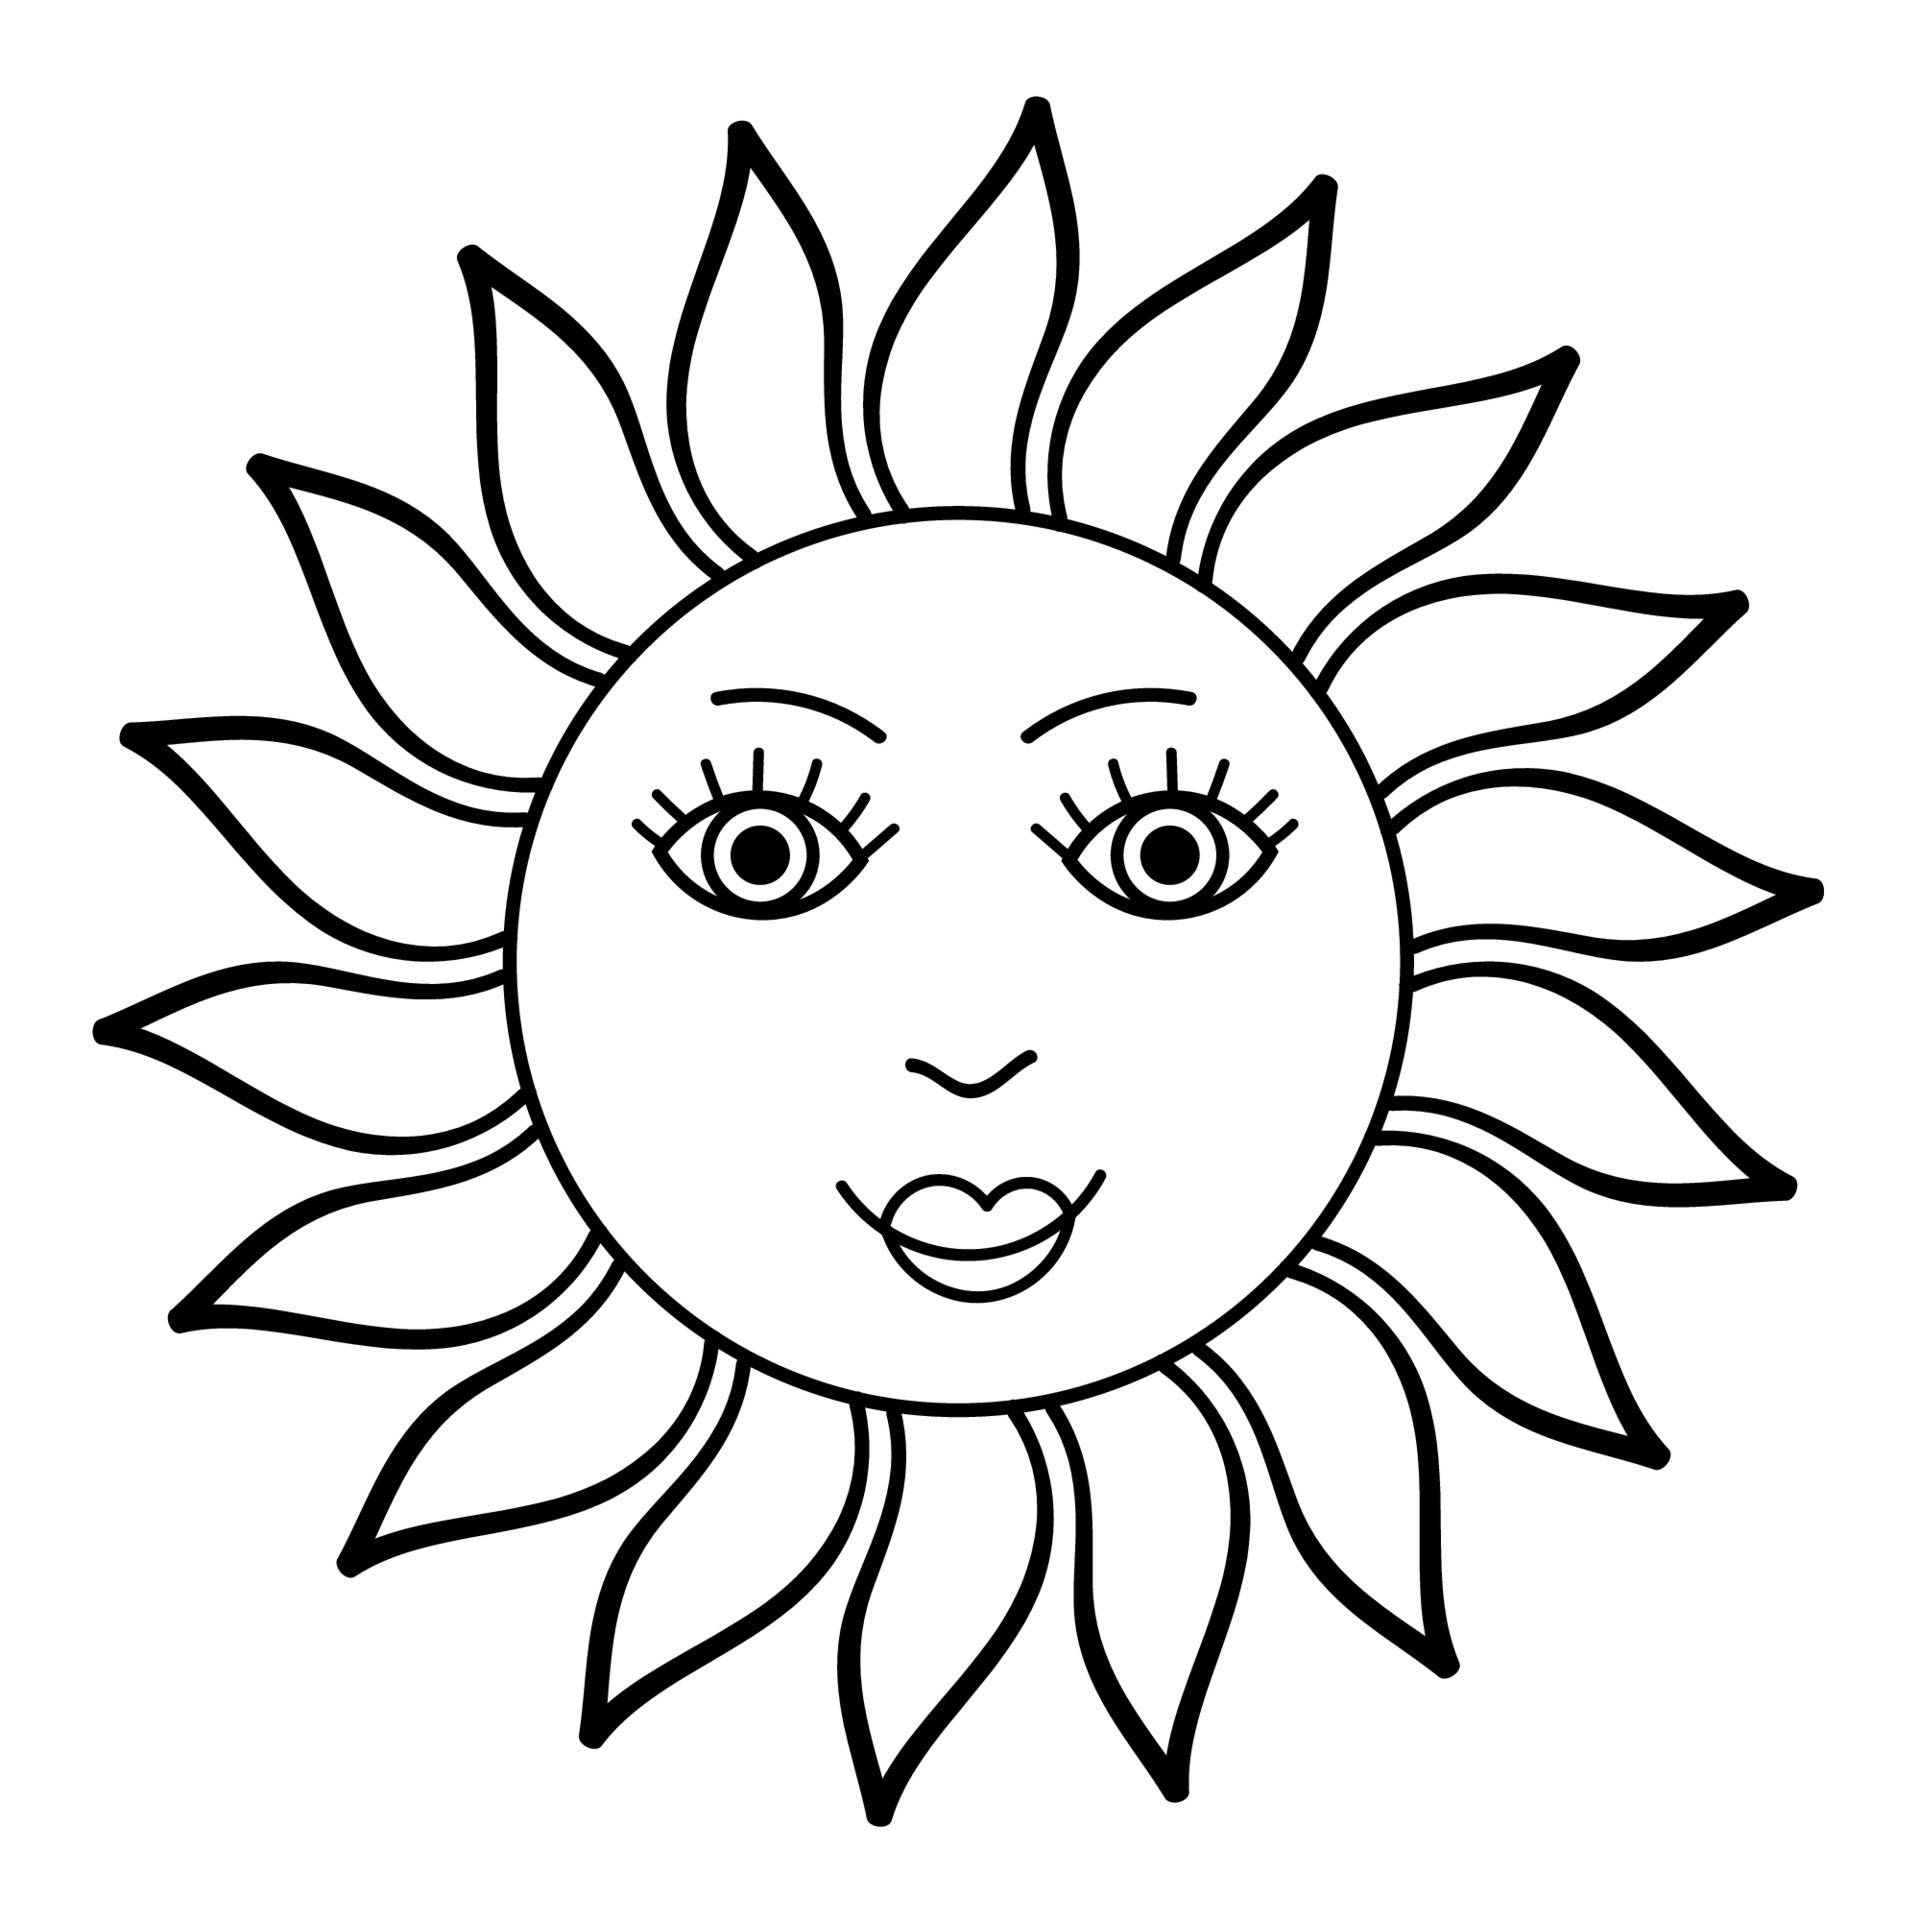 Cute cartoon doodle sun character isolated on white background. 6716643 ...